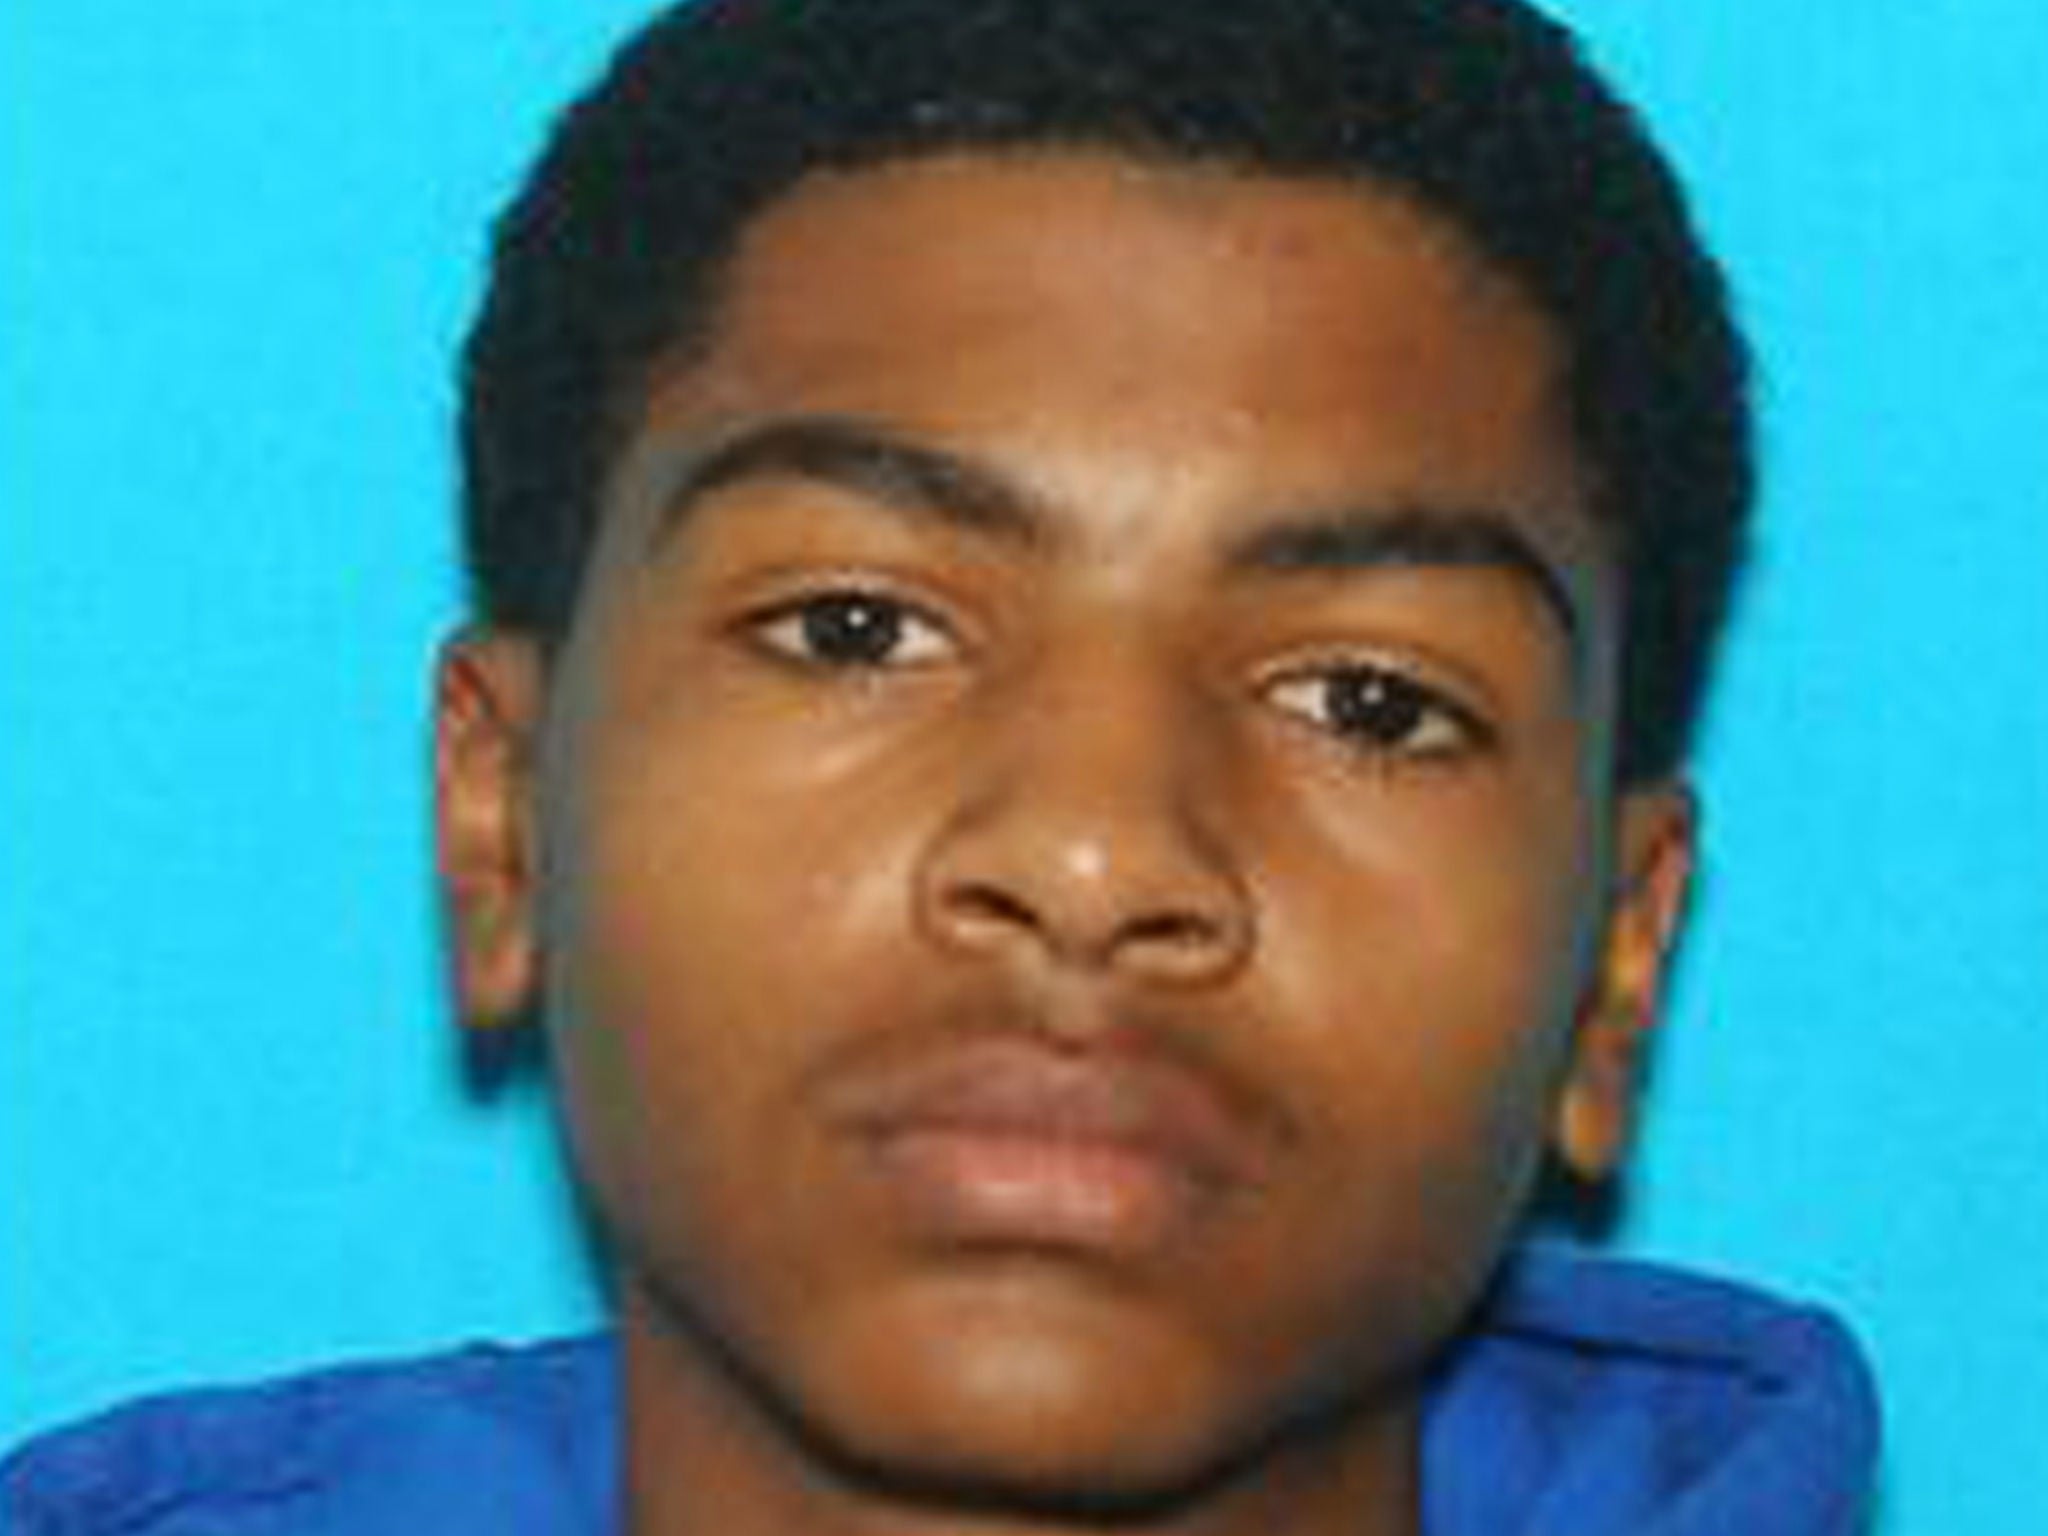 James Eric Davis Jr, who police have identified as the shooting suspect at a Central Michigan University residence hall